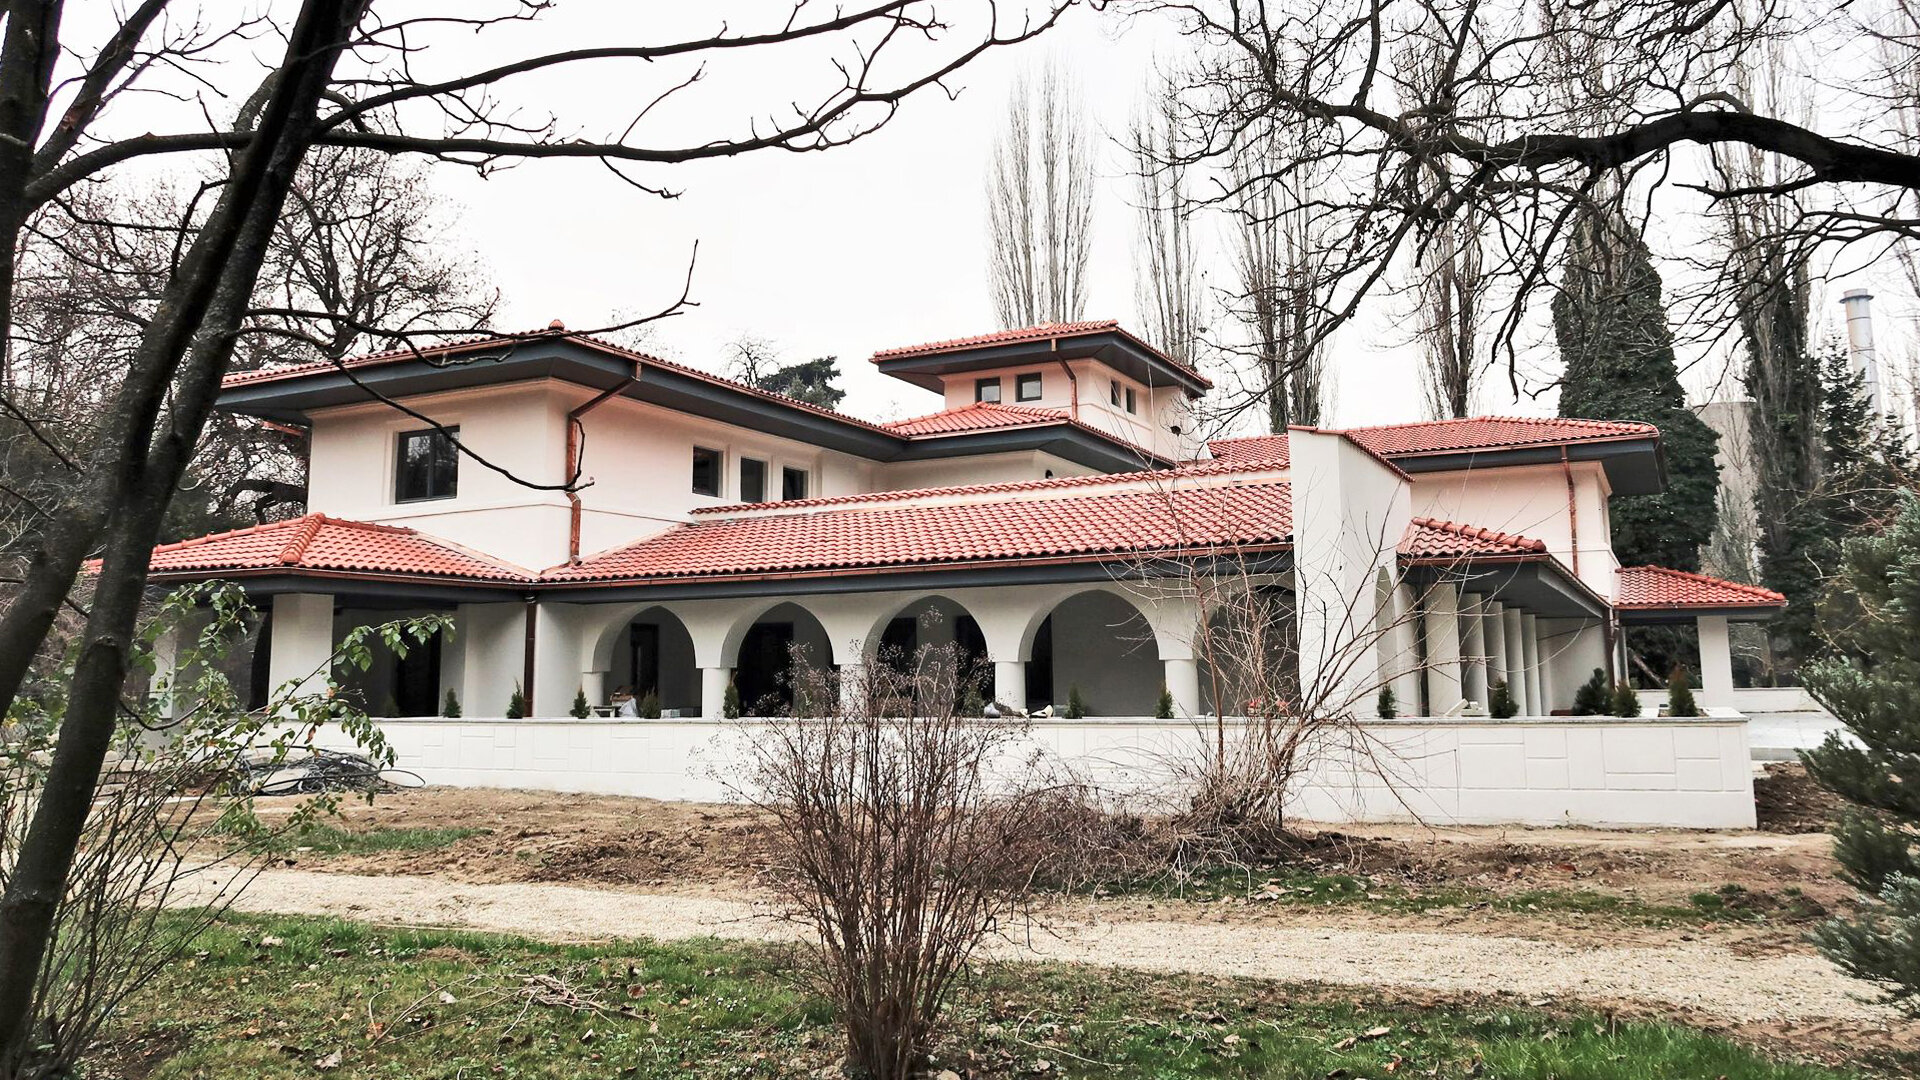 The restoration and the adaptive reuse of the former restaurant in Bucharest Botanical Garden